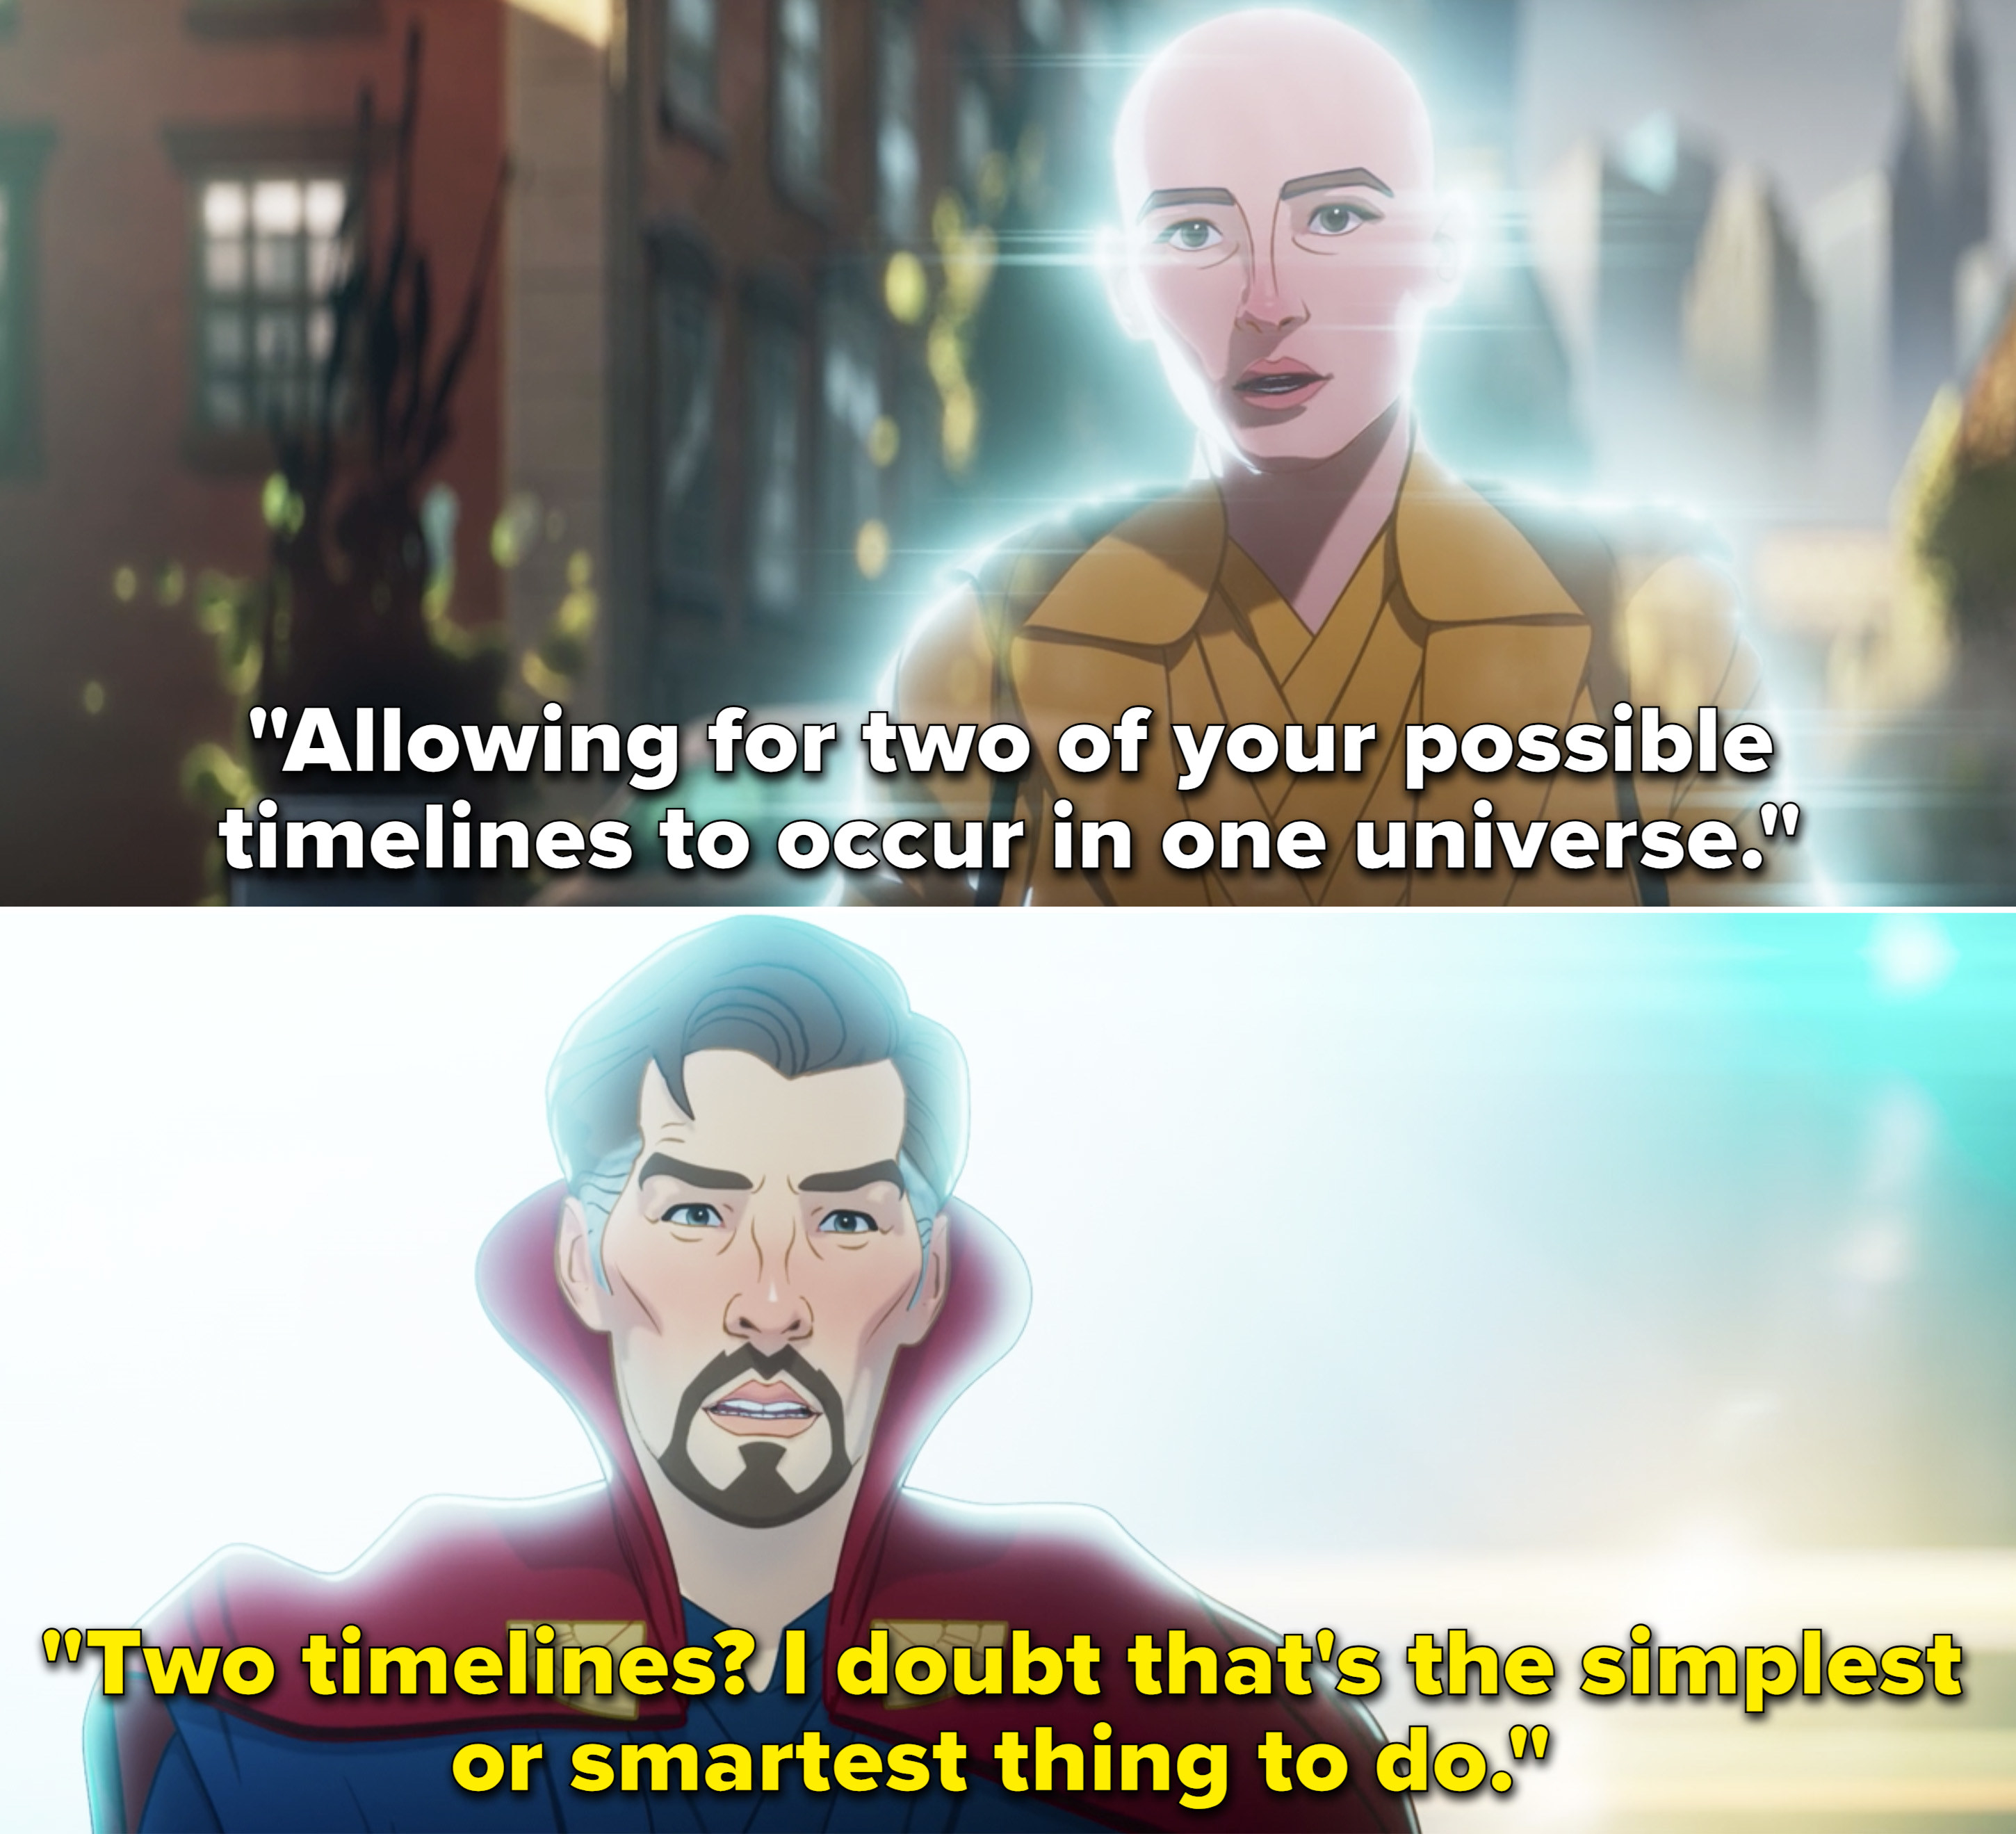 Stephen saying, &quot;Two timelines? I doubt that&#x27;s the simplest or smartest thing to do&quot;